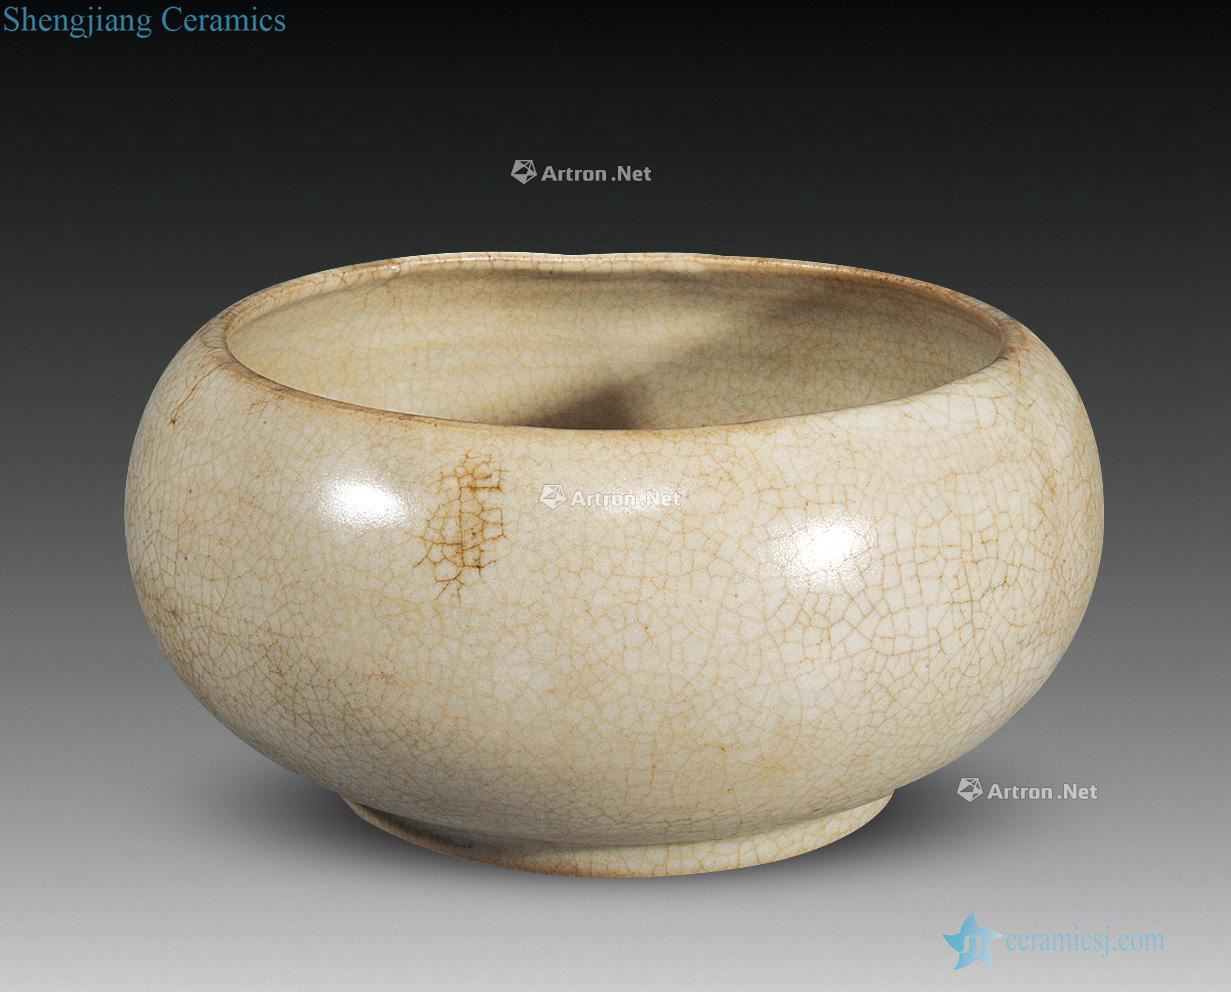 The song dynasty Your bowl in the furnace